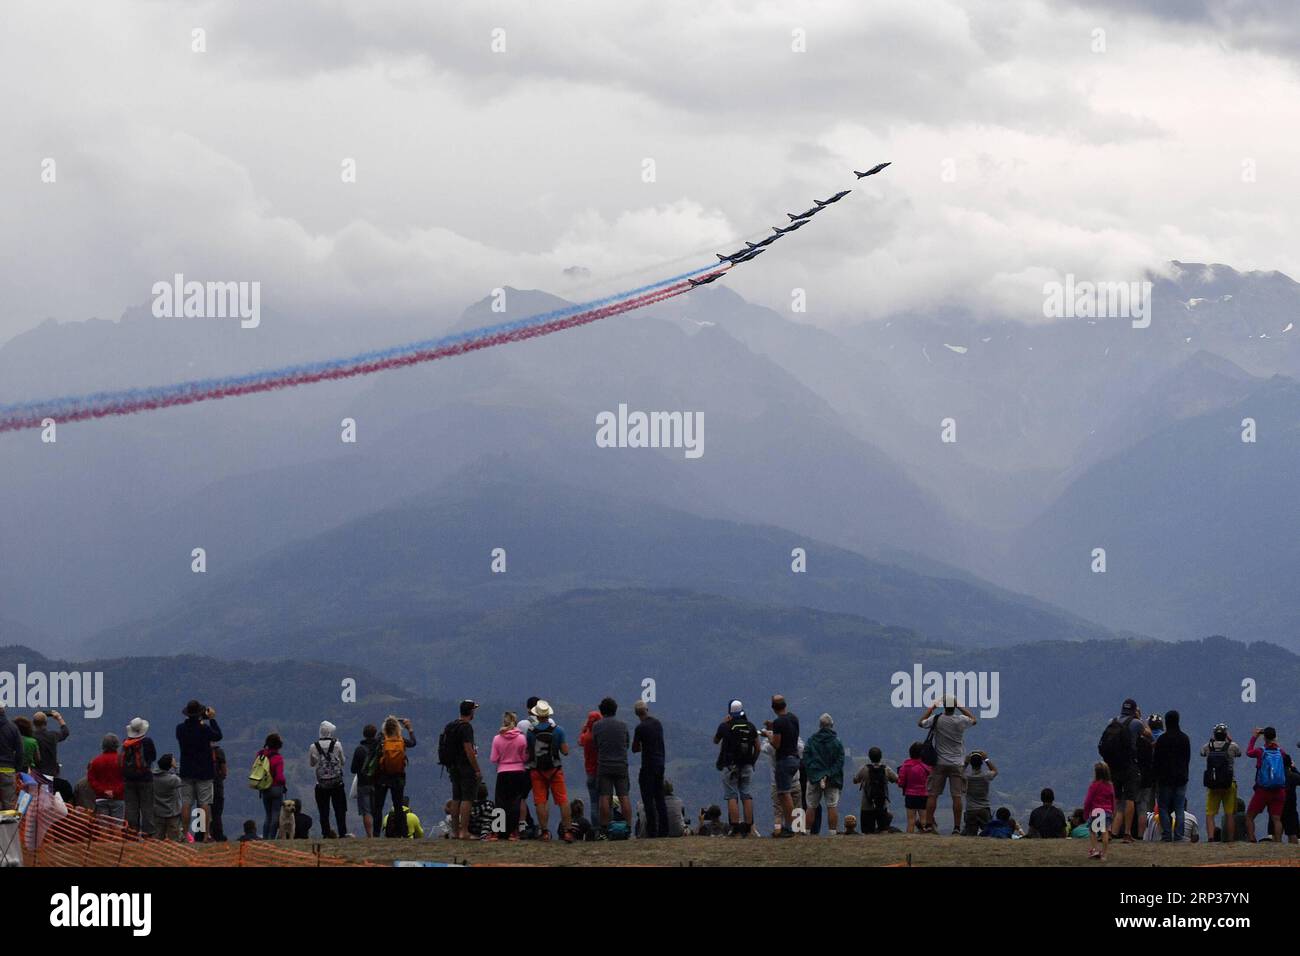 (180924) -- SAINT-HILAIRE, Sept. 24, 2018 (Xinhua) -- Spectators watch the show of Patrouille de France in Saint-Hilaire, France on Sept. 21, 2018. The four-day air sports festival, Coupe Icare, concluded on Sunday. On its 45th edition, the Coupe Icare this year attracted about 700 accredited pilots and over 90,000 spectators. (Xinhua/Chen Yichen) (SP)FRANCE-SAINT-HILAIRE-AIR SPORTS-45TH COUPE ICARE PUBLICATIONxNOTxINxCHN Stock Photo